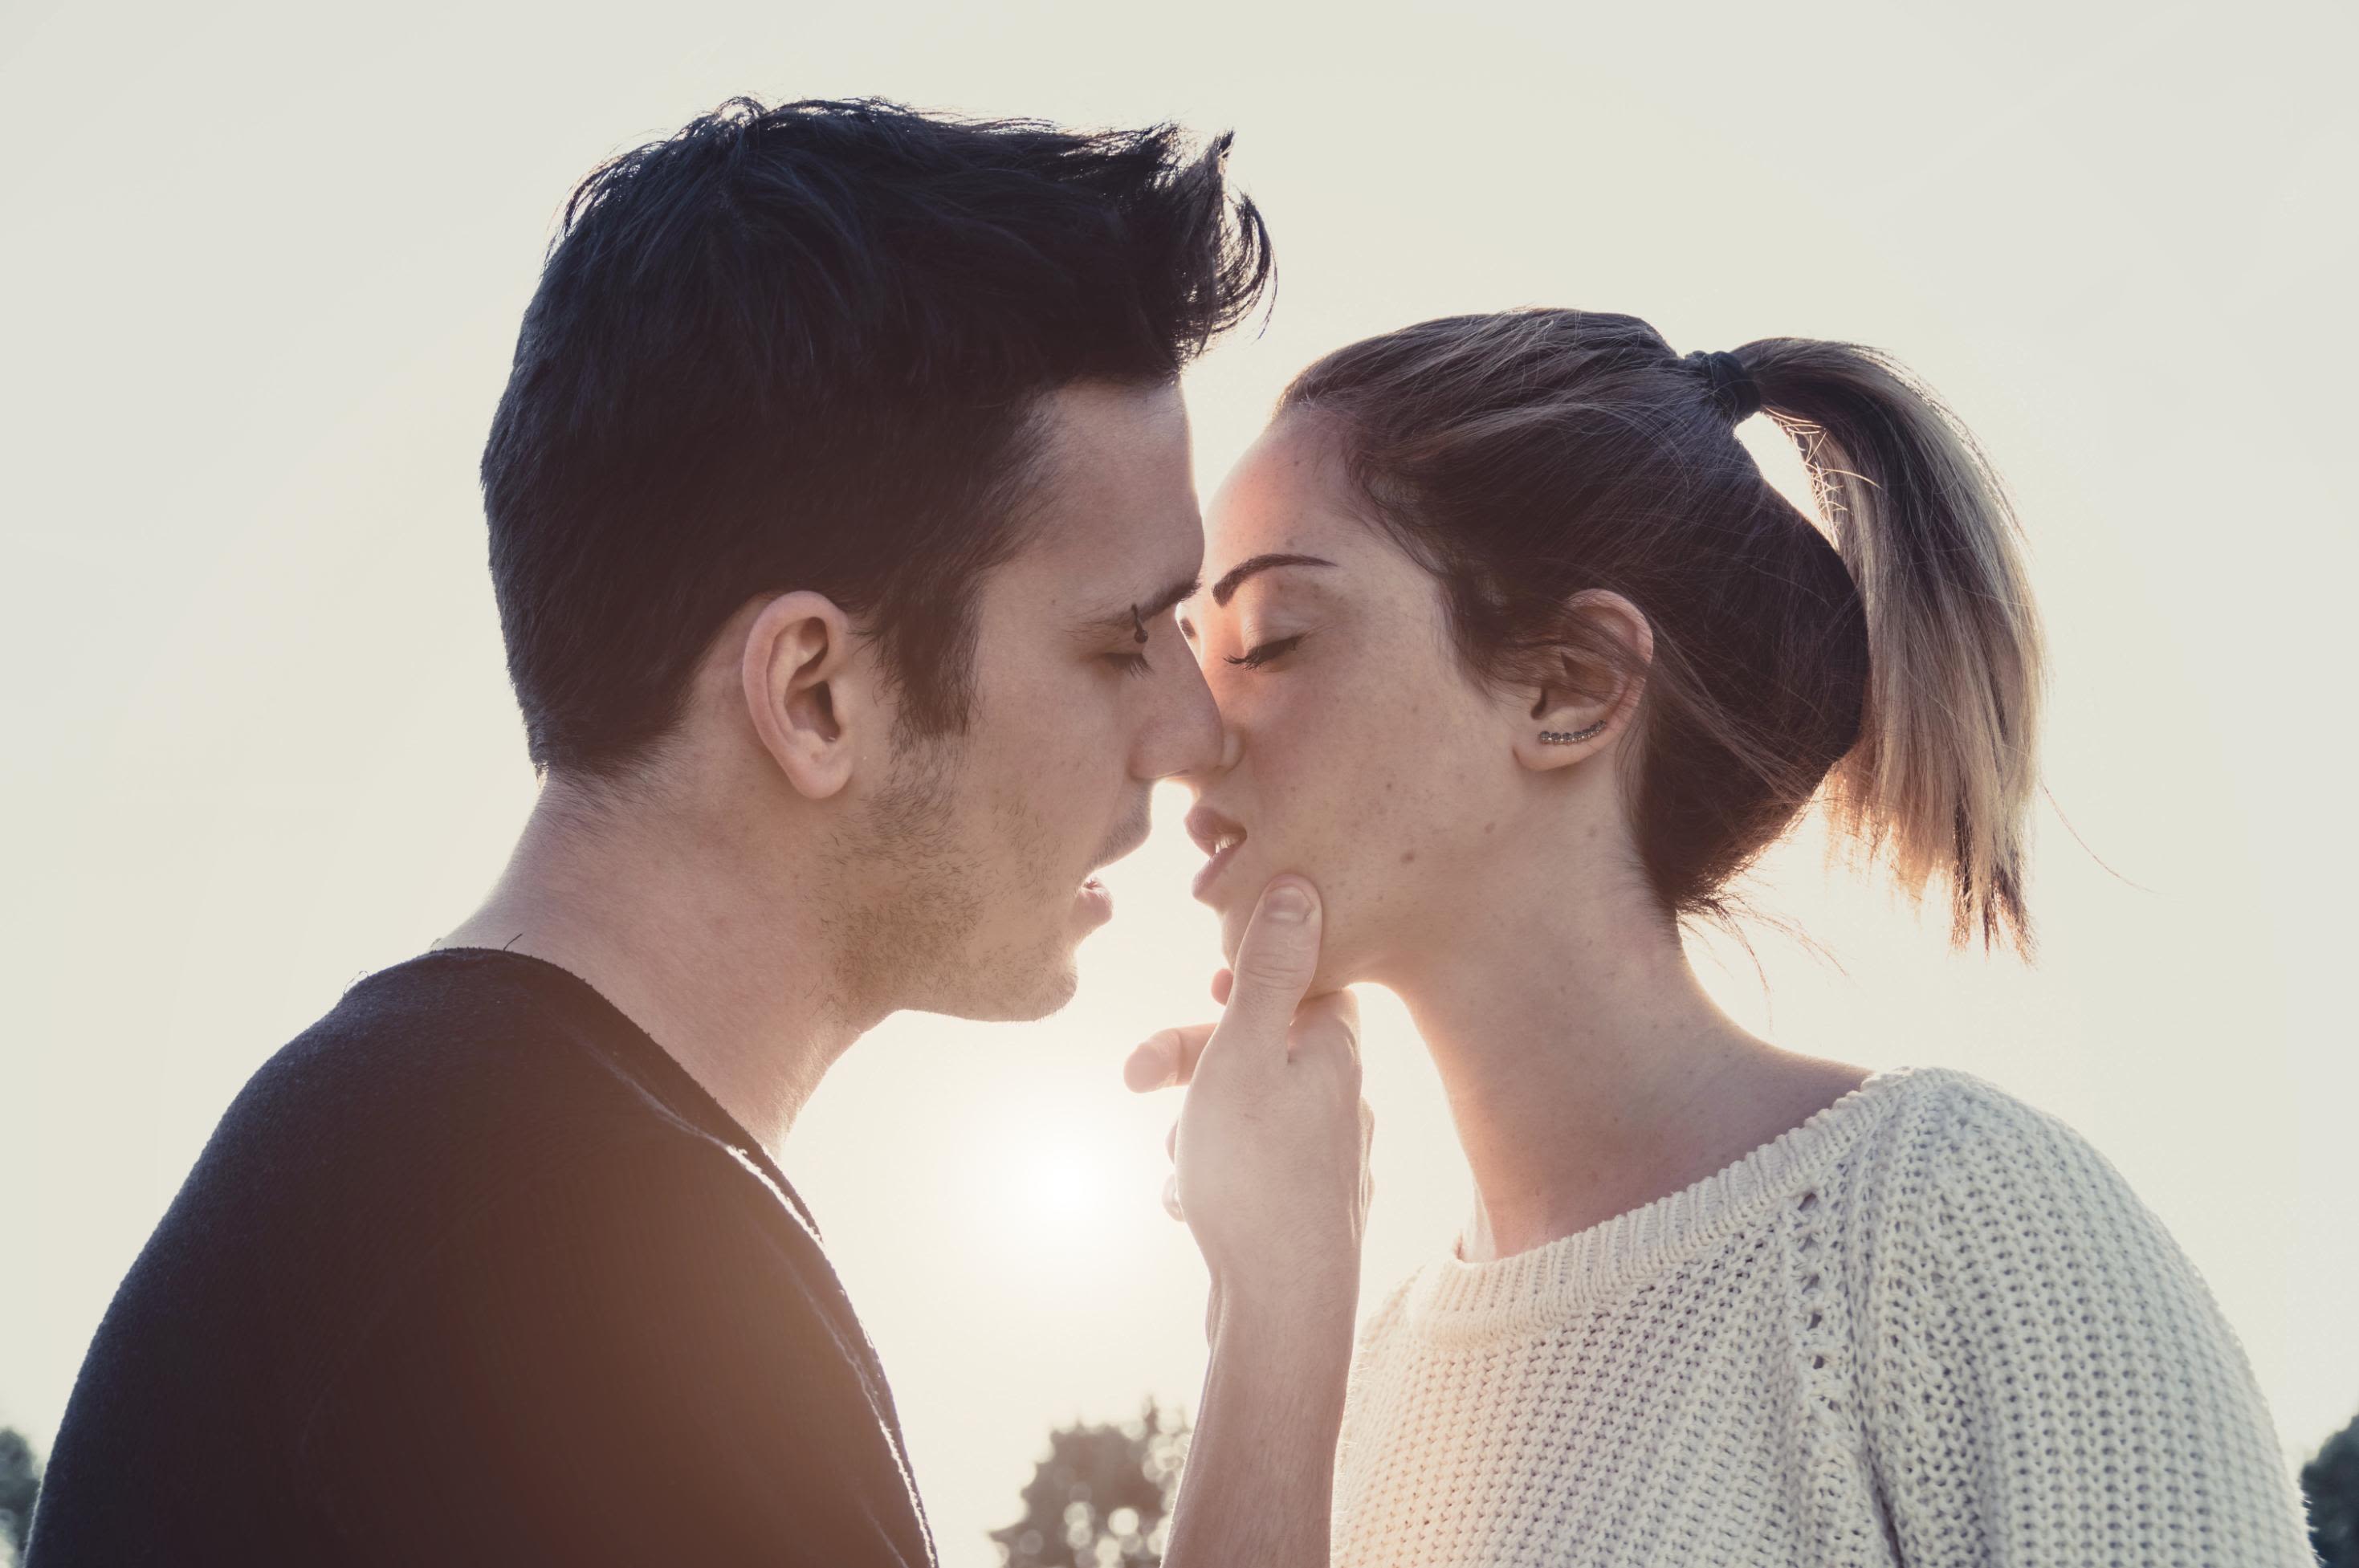 Here's why we call the open-mouth smooch a 'French kiss